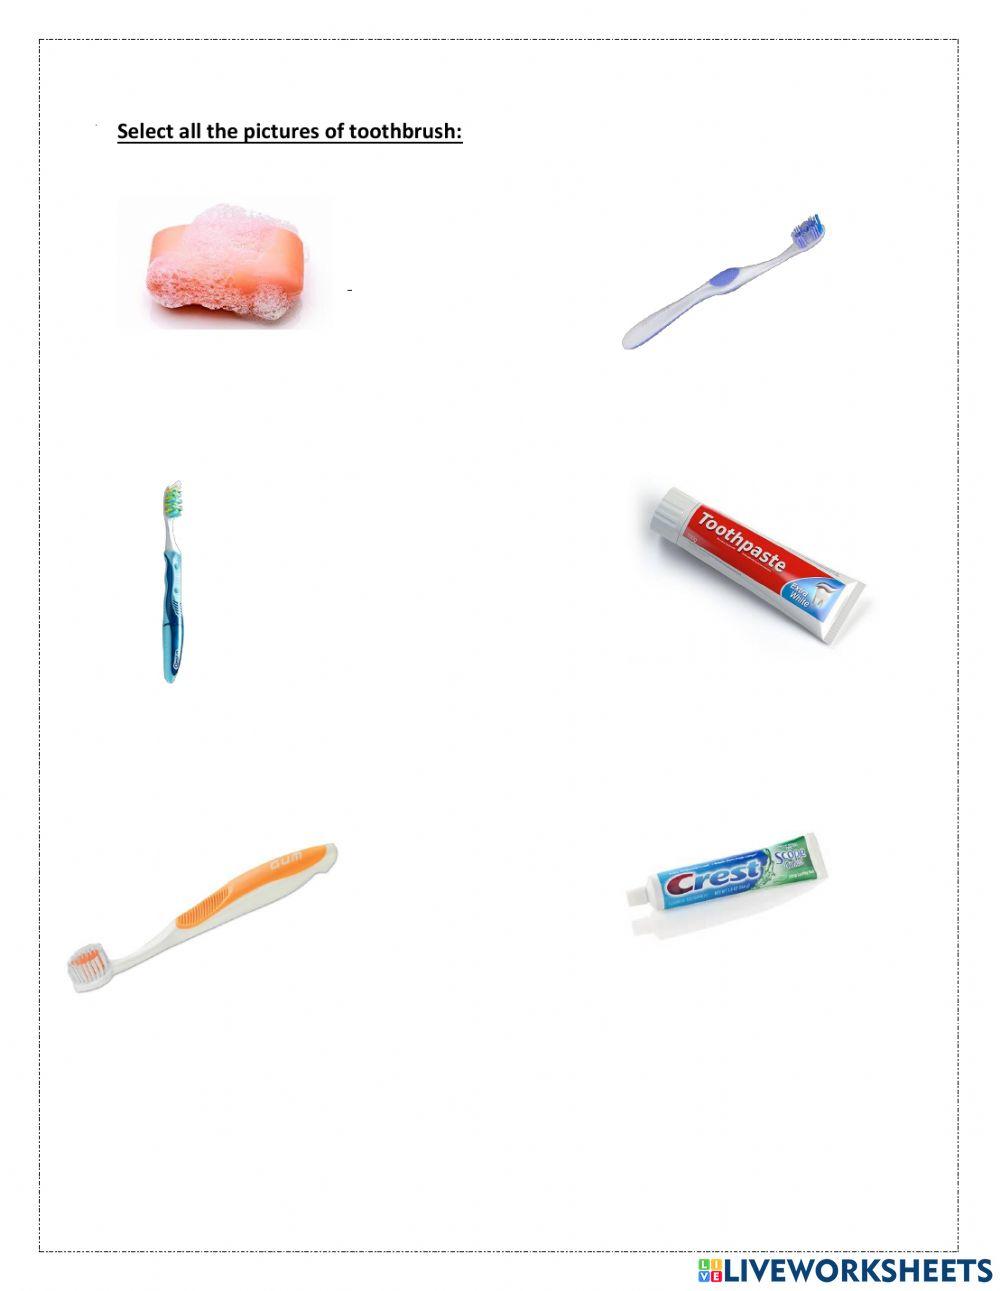 Select all the pictures of Toothbrush